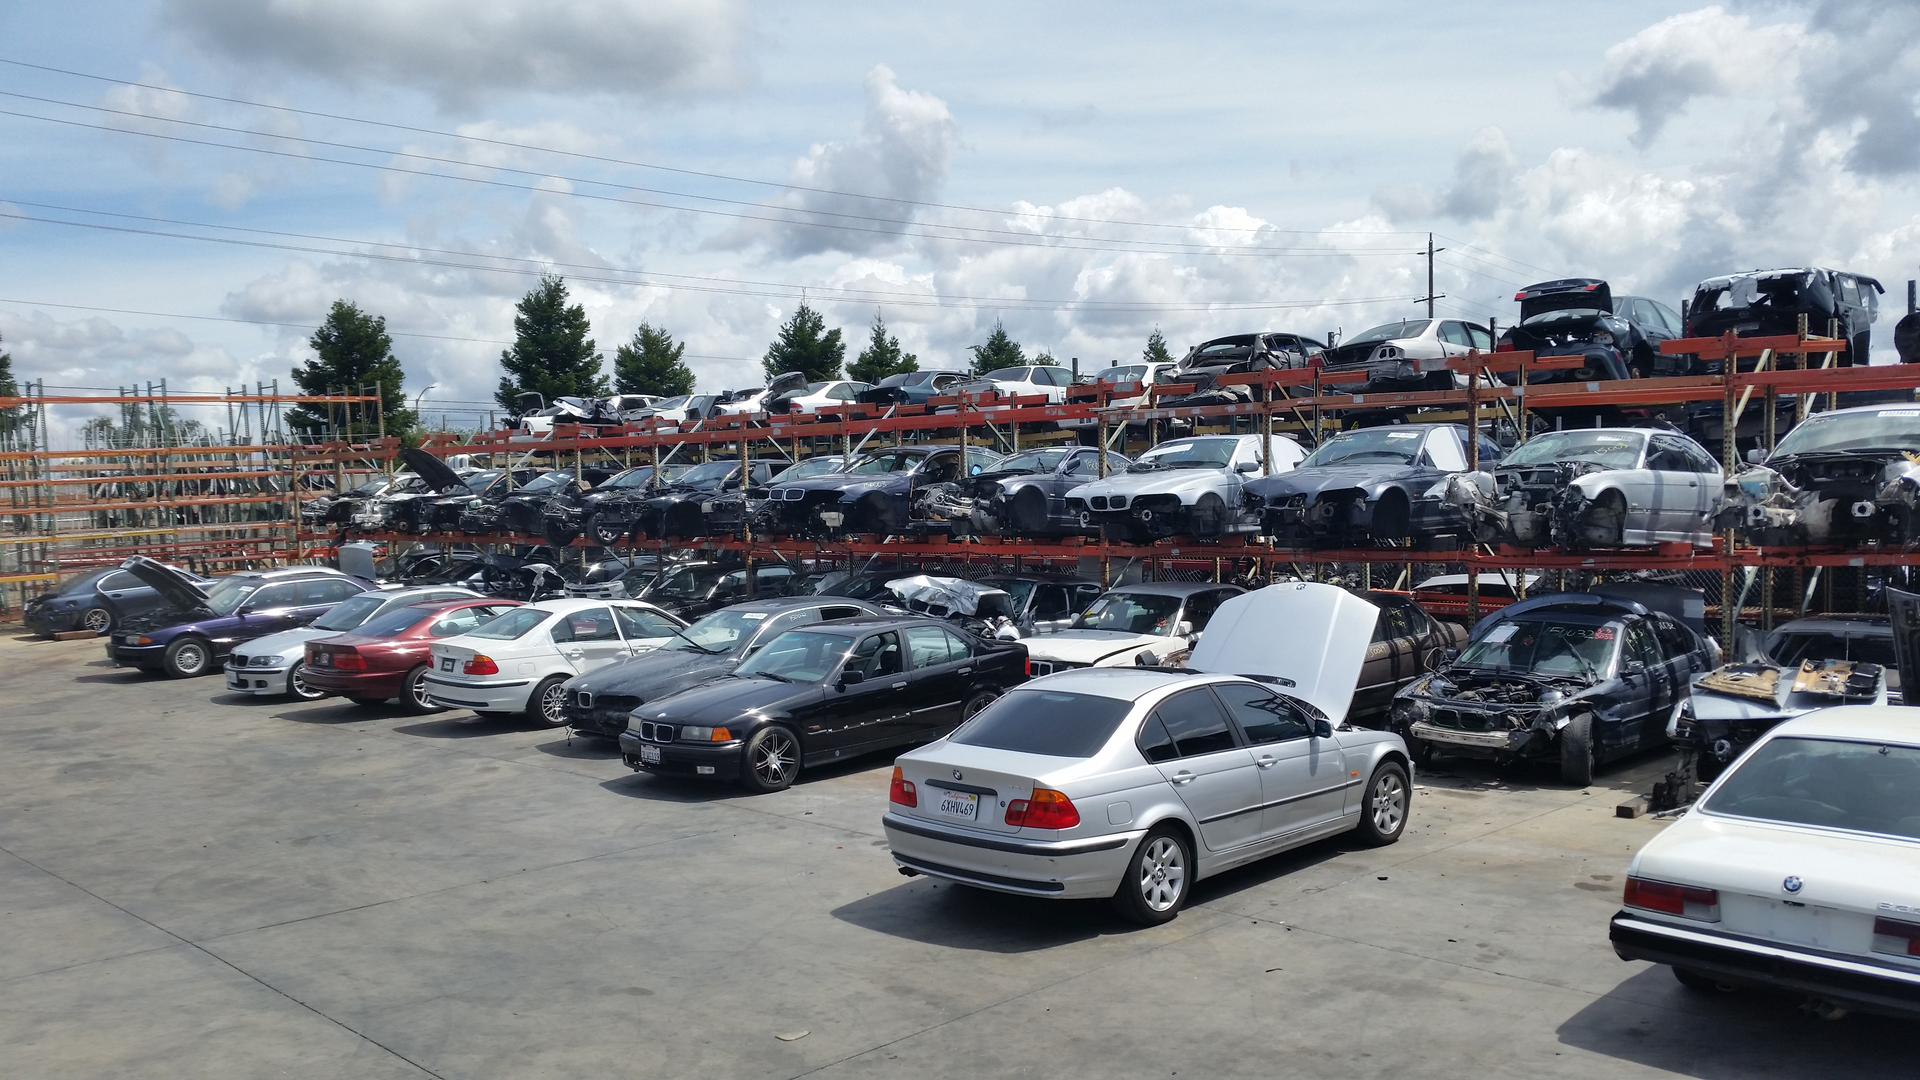 Auto Wreckers & Car Part Suppliers in Canberra ACT – A Master List